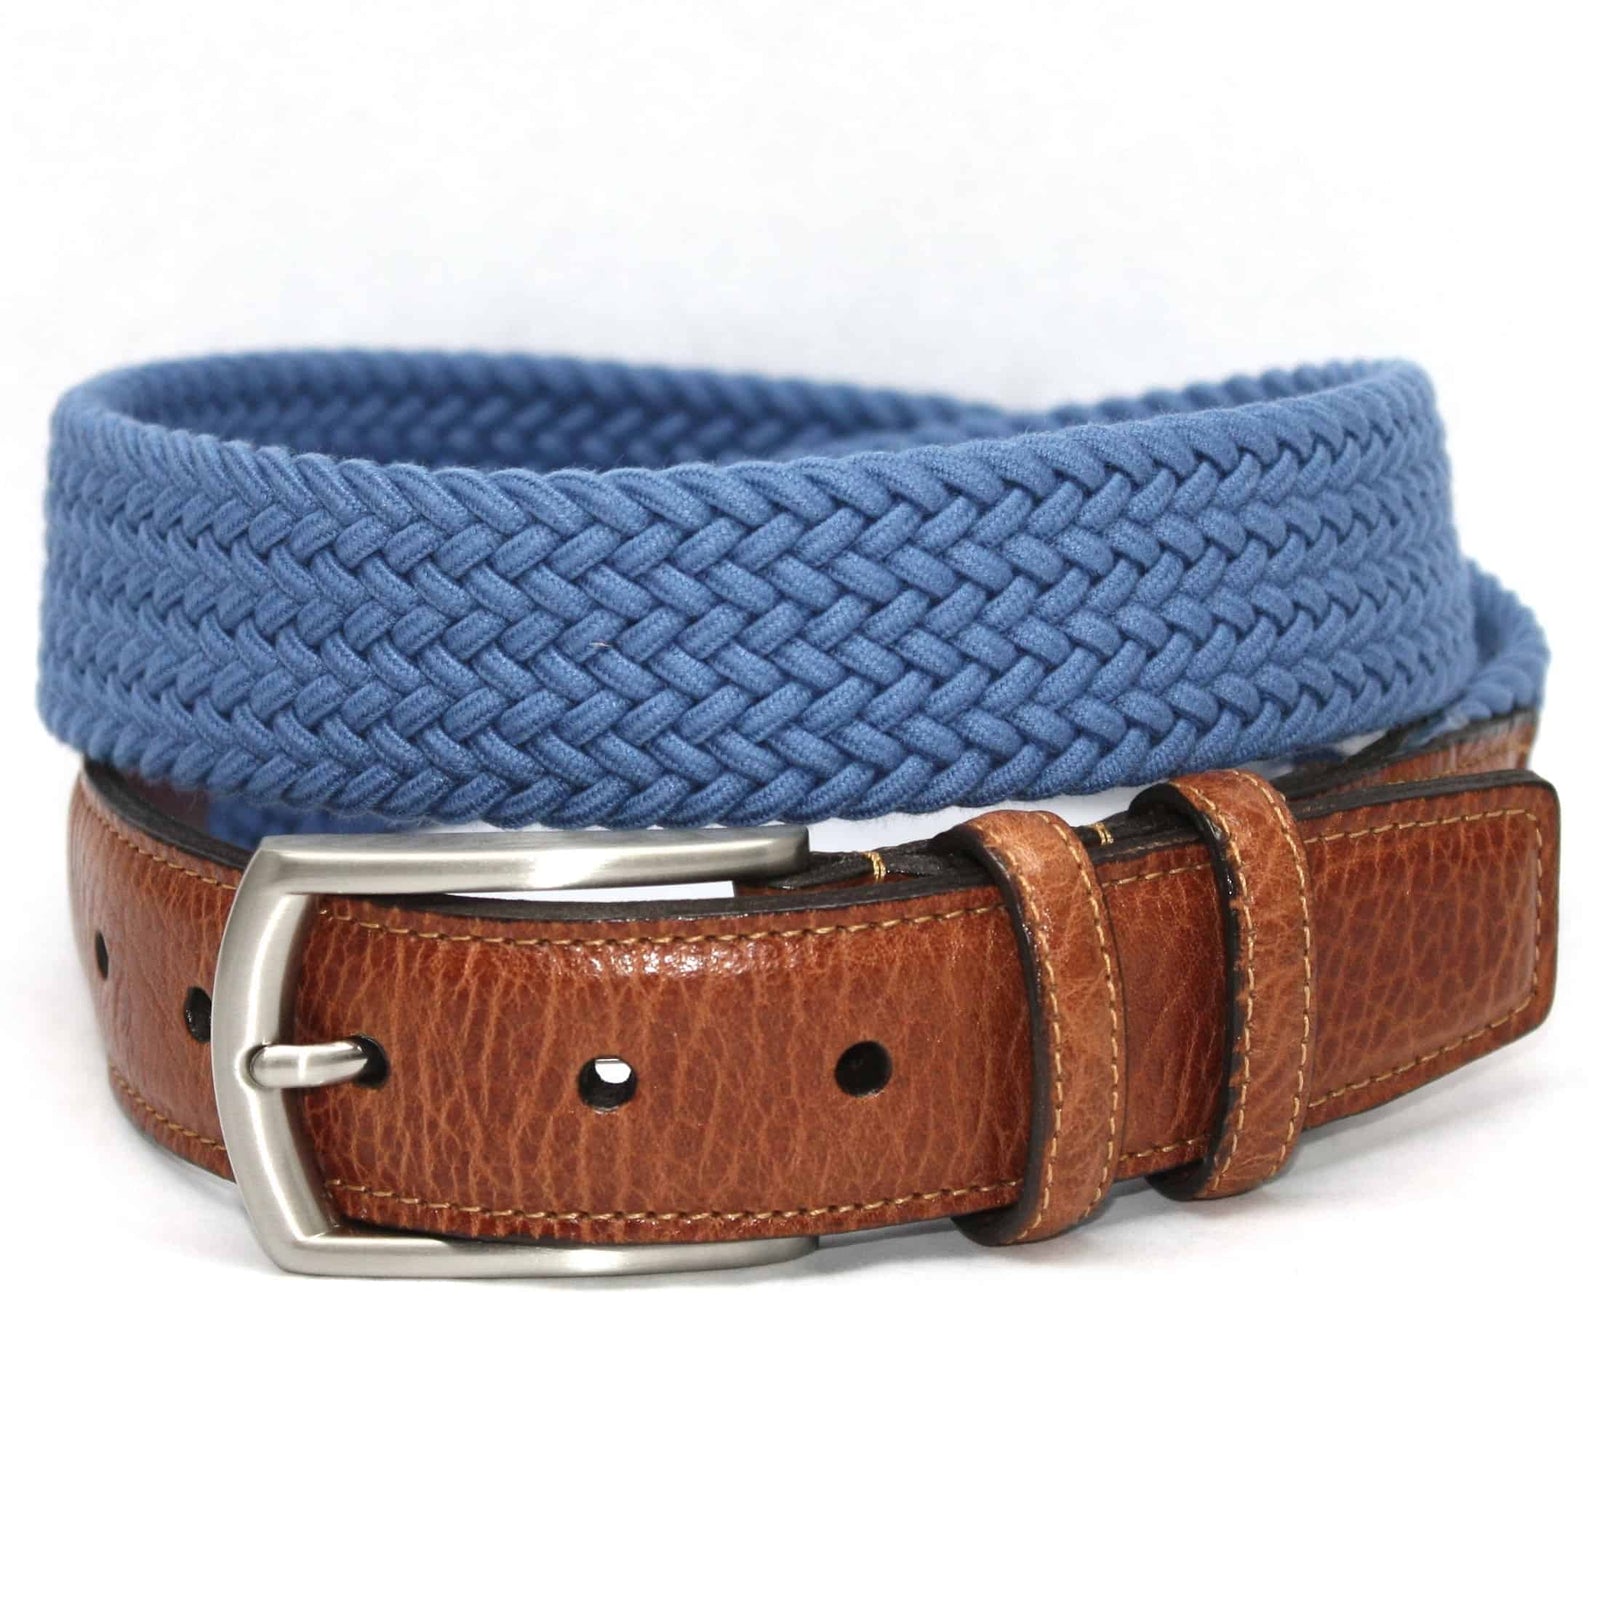 Italian Woven Cotton Elastic Belt in Royal Blue by Torino Leather - J ...